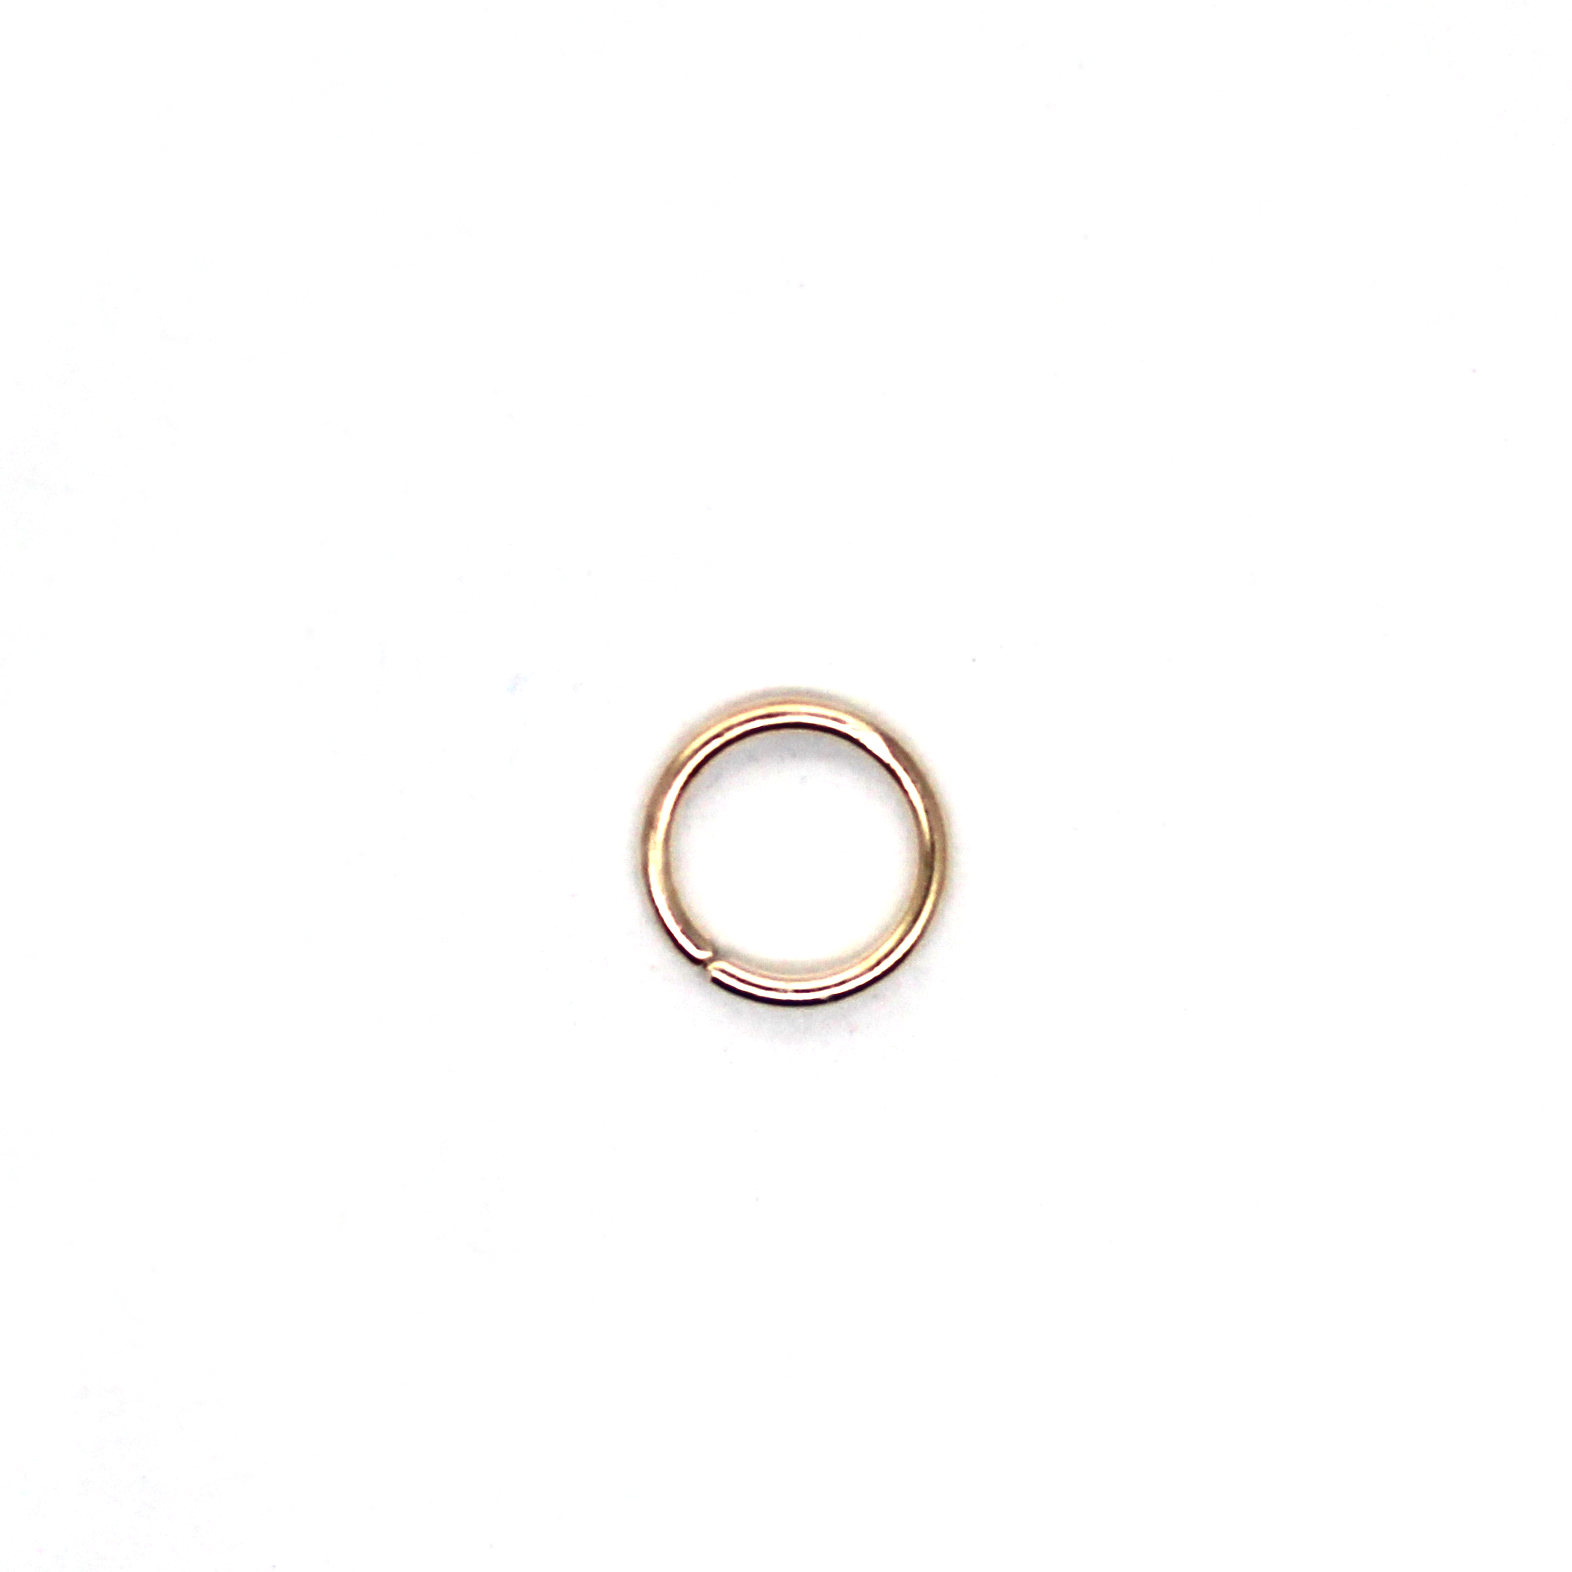 Jump Rings, Rose Gold, Alloy, Round, 10mm, 18 Gauge, Sold Per pkg of Approx 100+